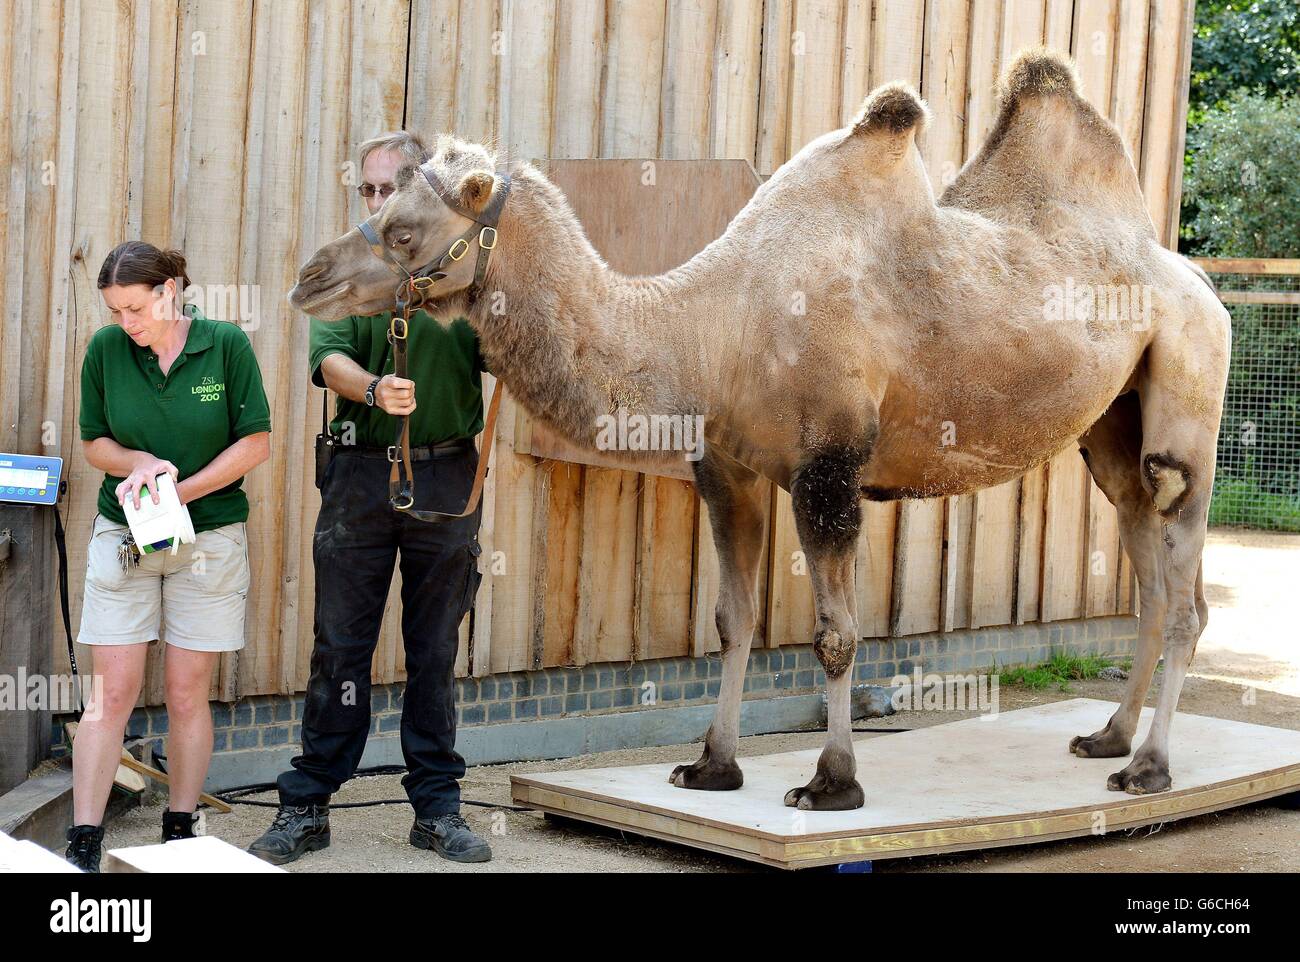 Noemie, the Camel, stands on a set of electronic scales and is weighed, during the annual stock take of weights and sizes, at the London Zoo in Regents Park in central London. Stock Photo